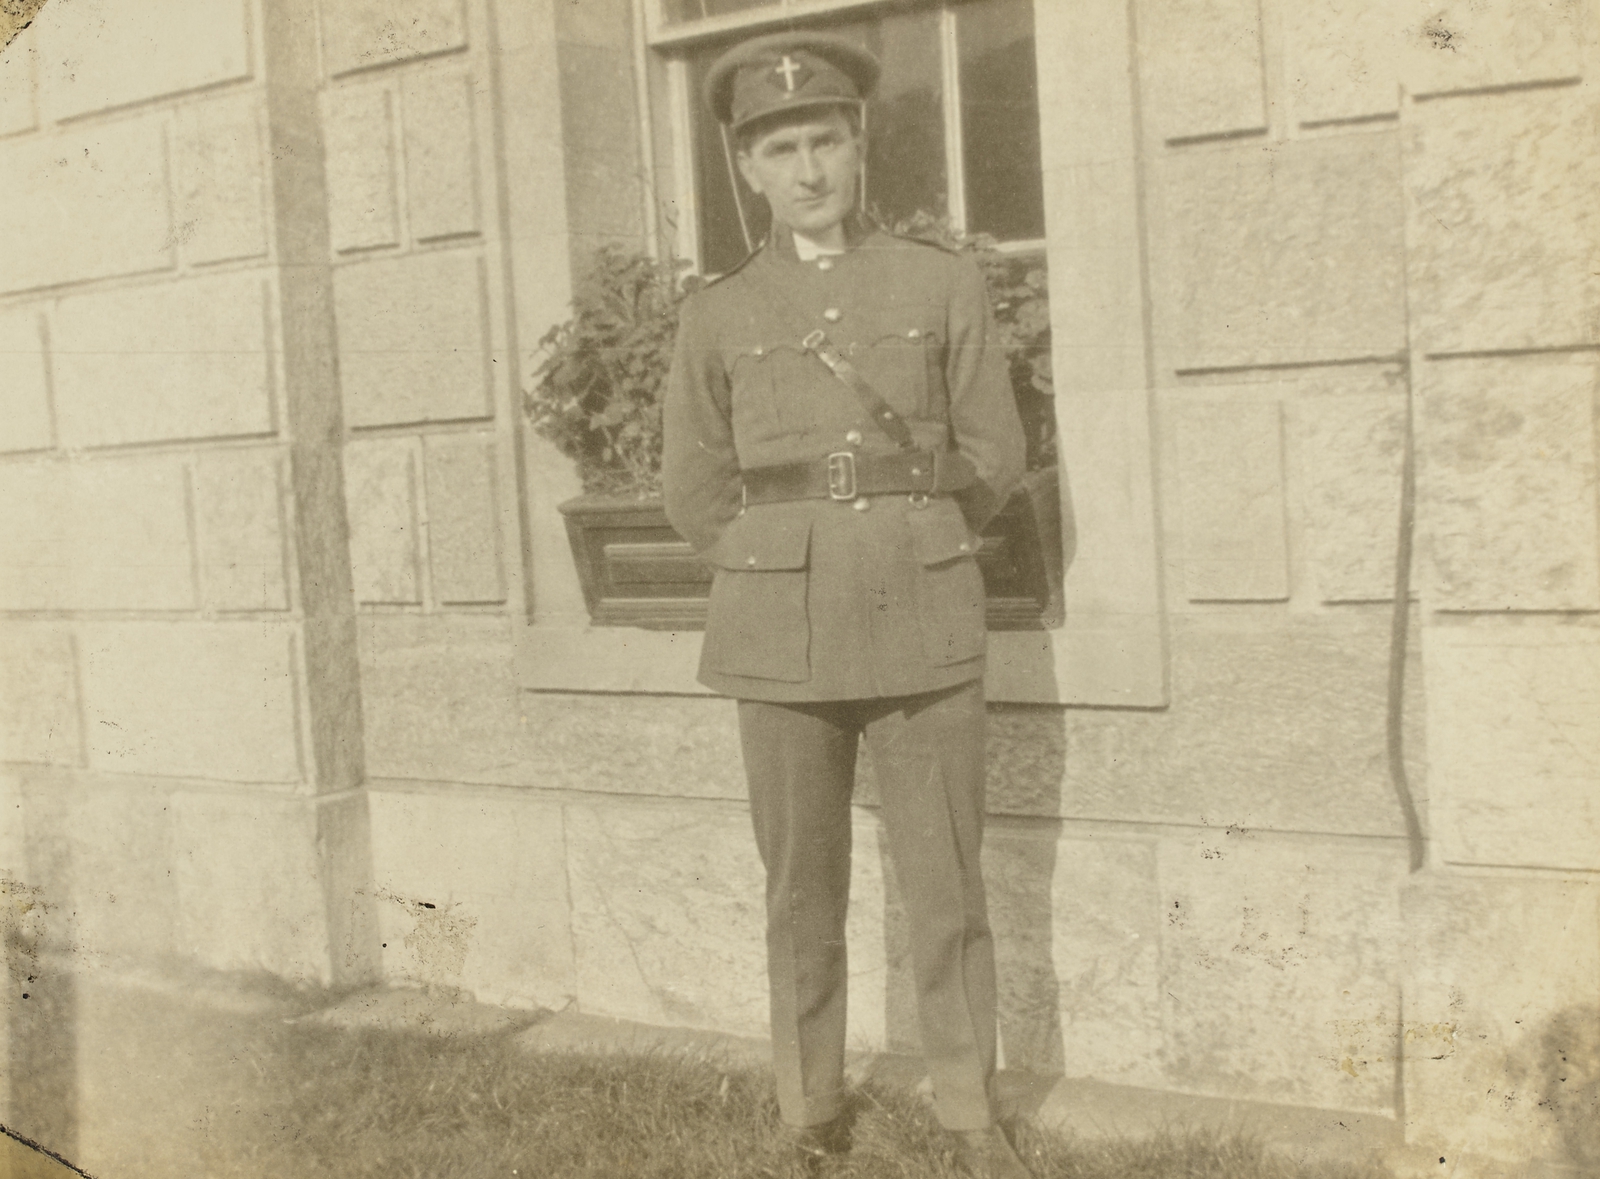 Image - Captain Rev. Denis J. Wilson, Chaplain to the National Army. Image courtesy of the National Library of Ireland